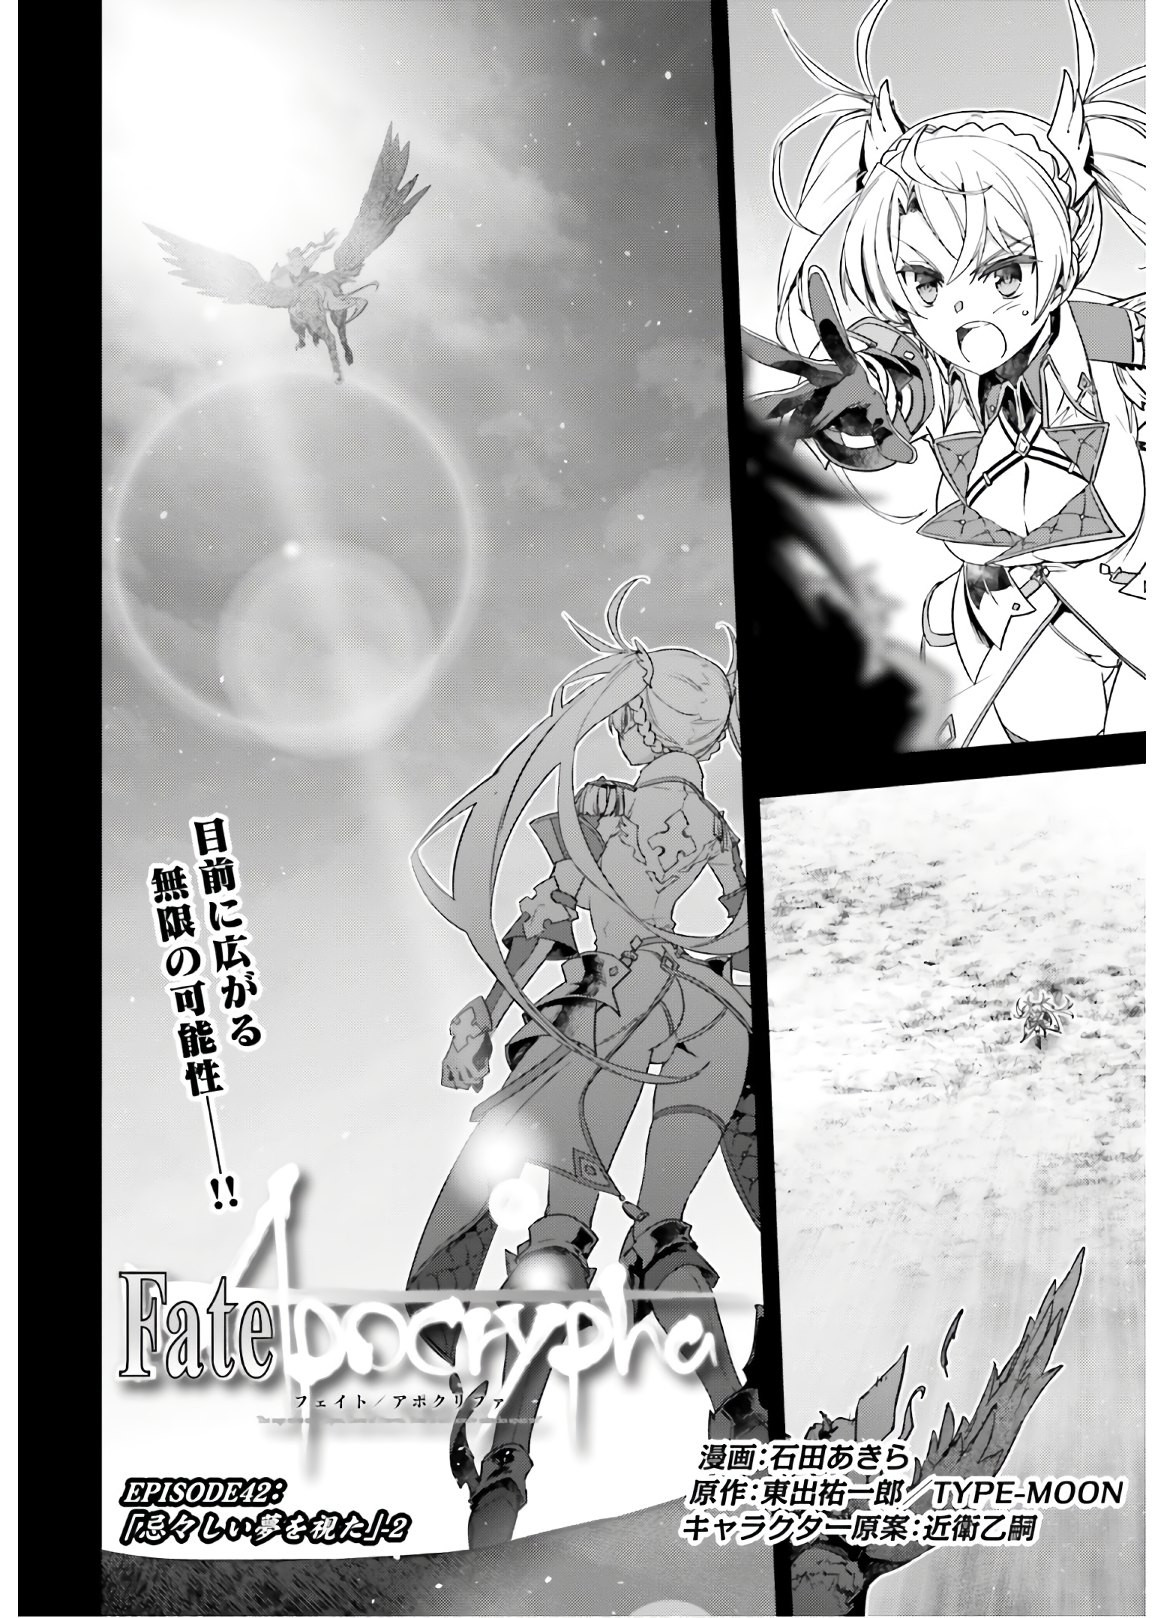 Fate-Apocrypha - Chapter 42-2 - Page 2